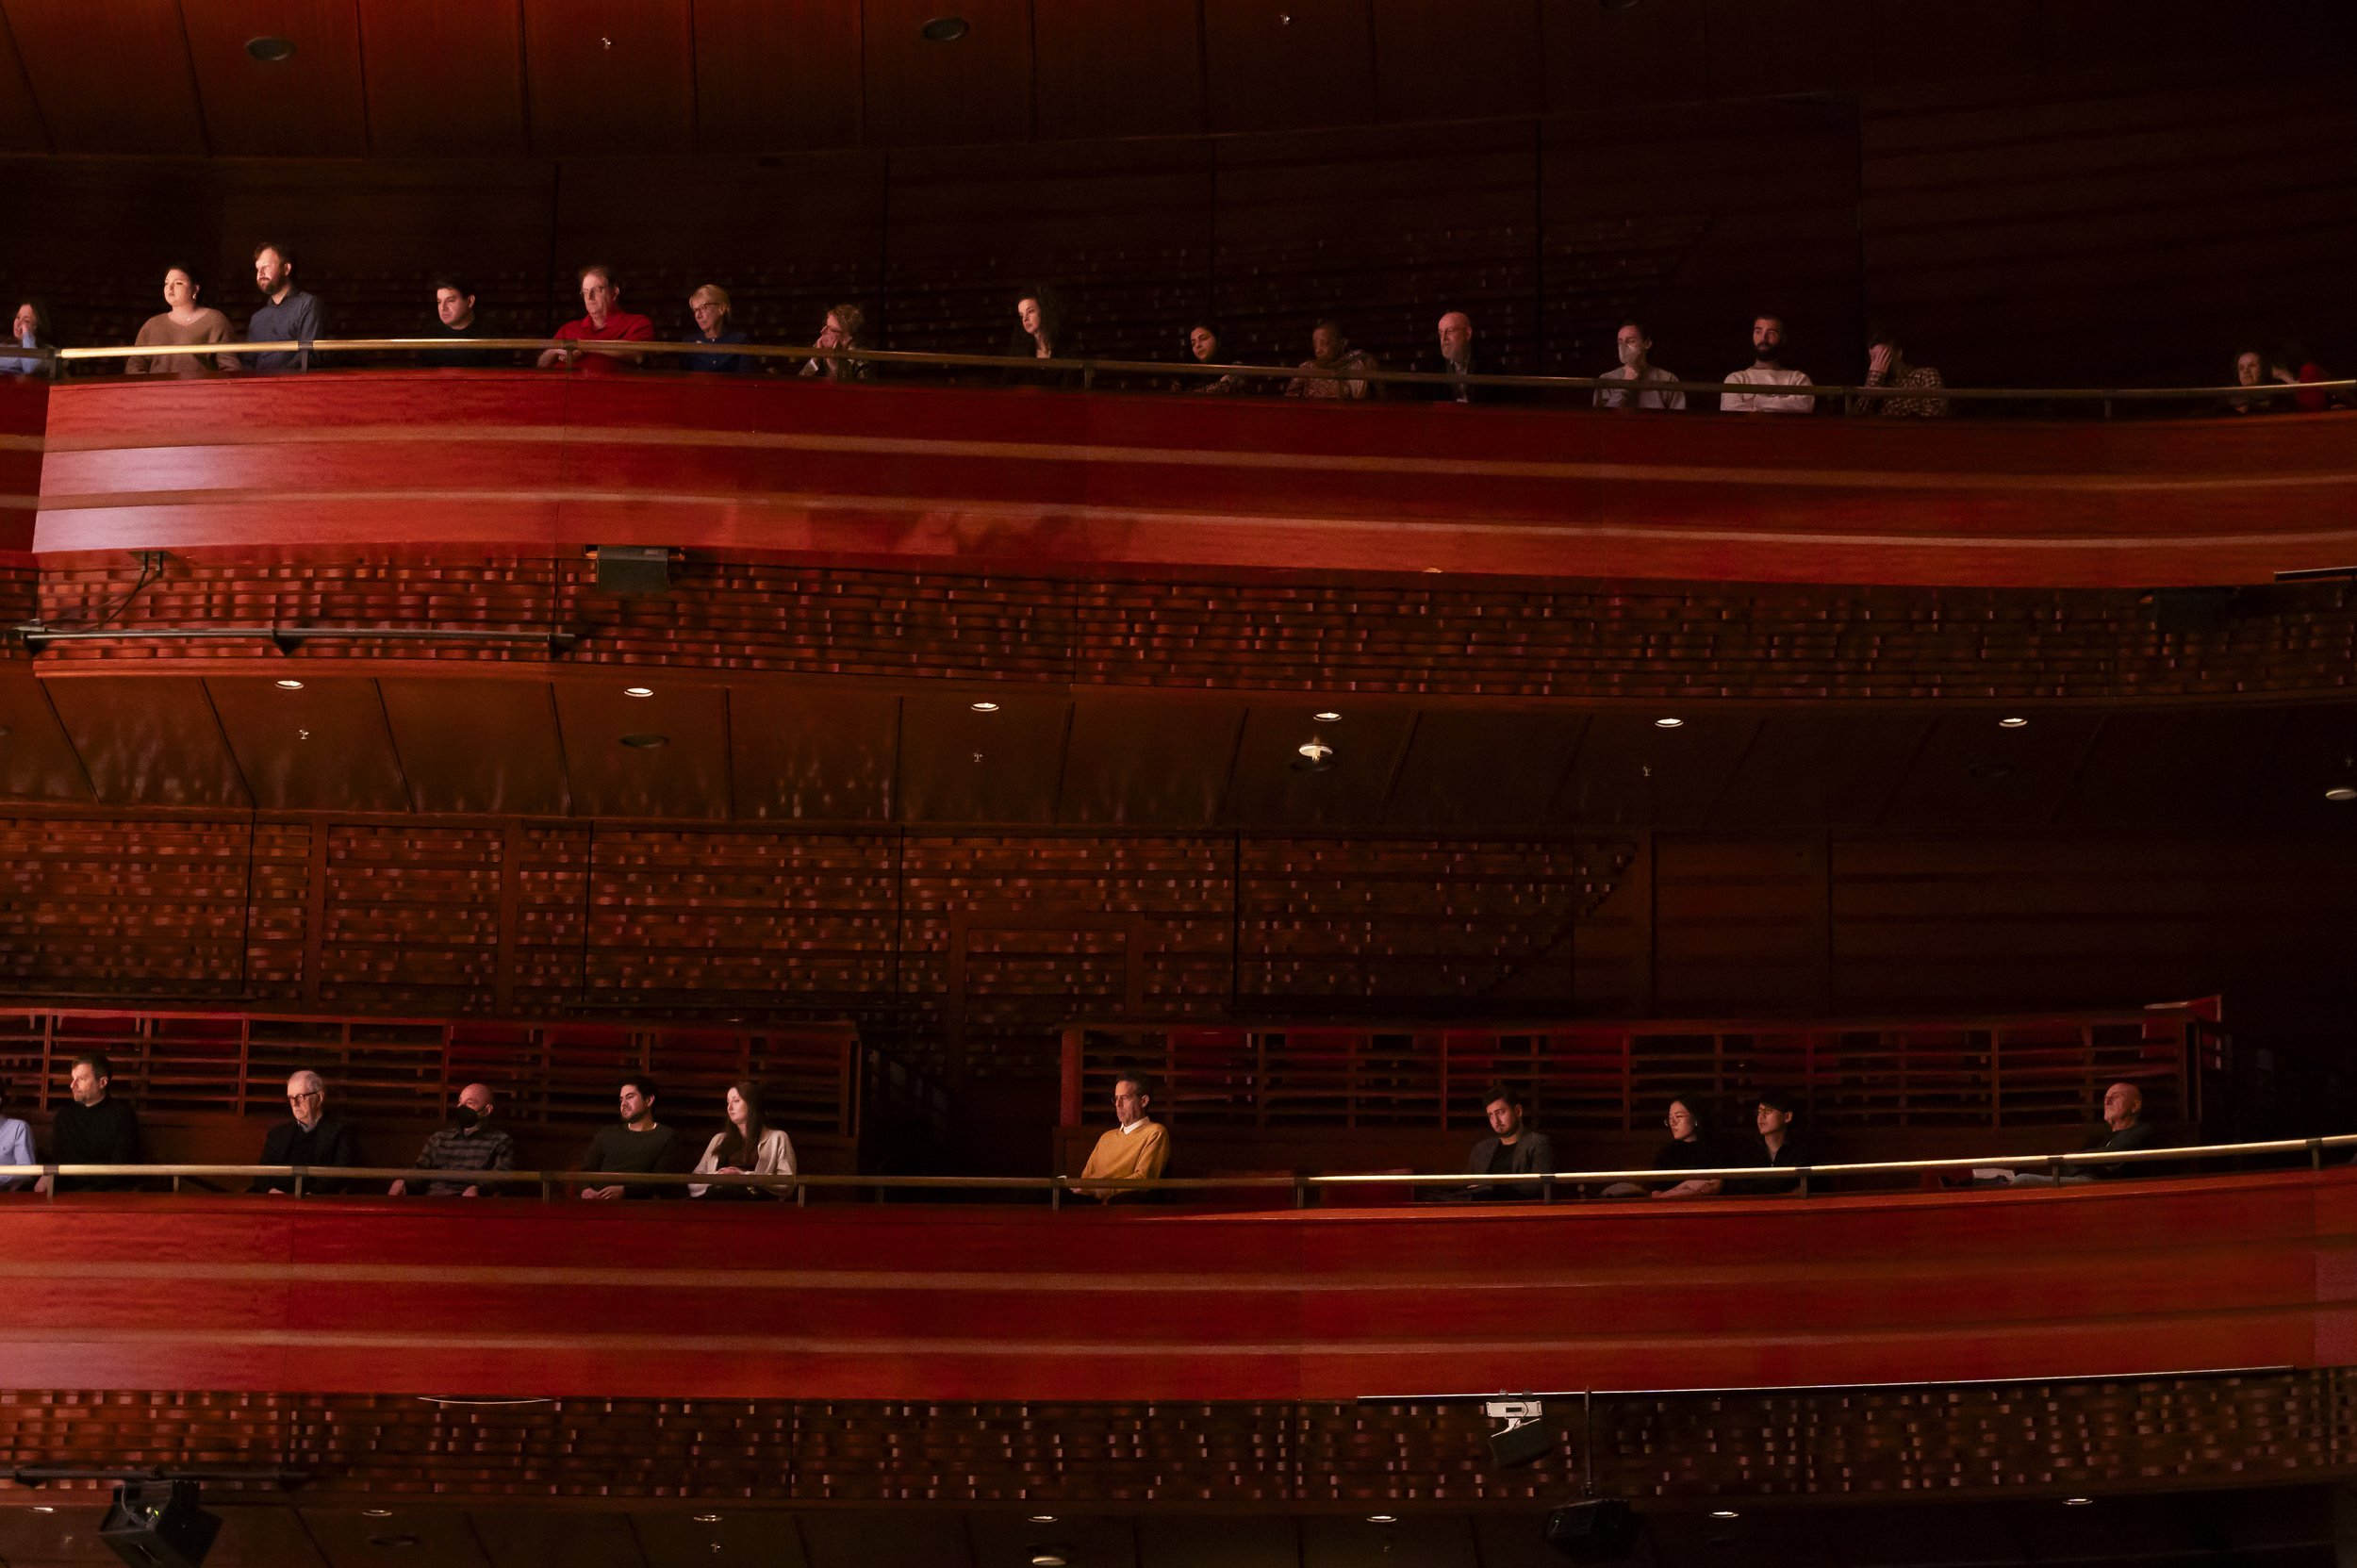   Members of the audience watch the Berlin Staatskapelle perform at the Kimmel Center in Philadelphia, Pa. to start their international orchestra series on Sunday, Dec. 3, 2023.  